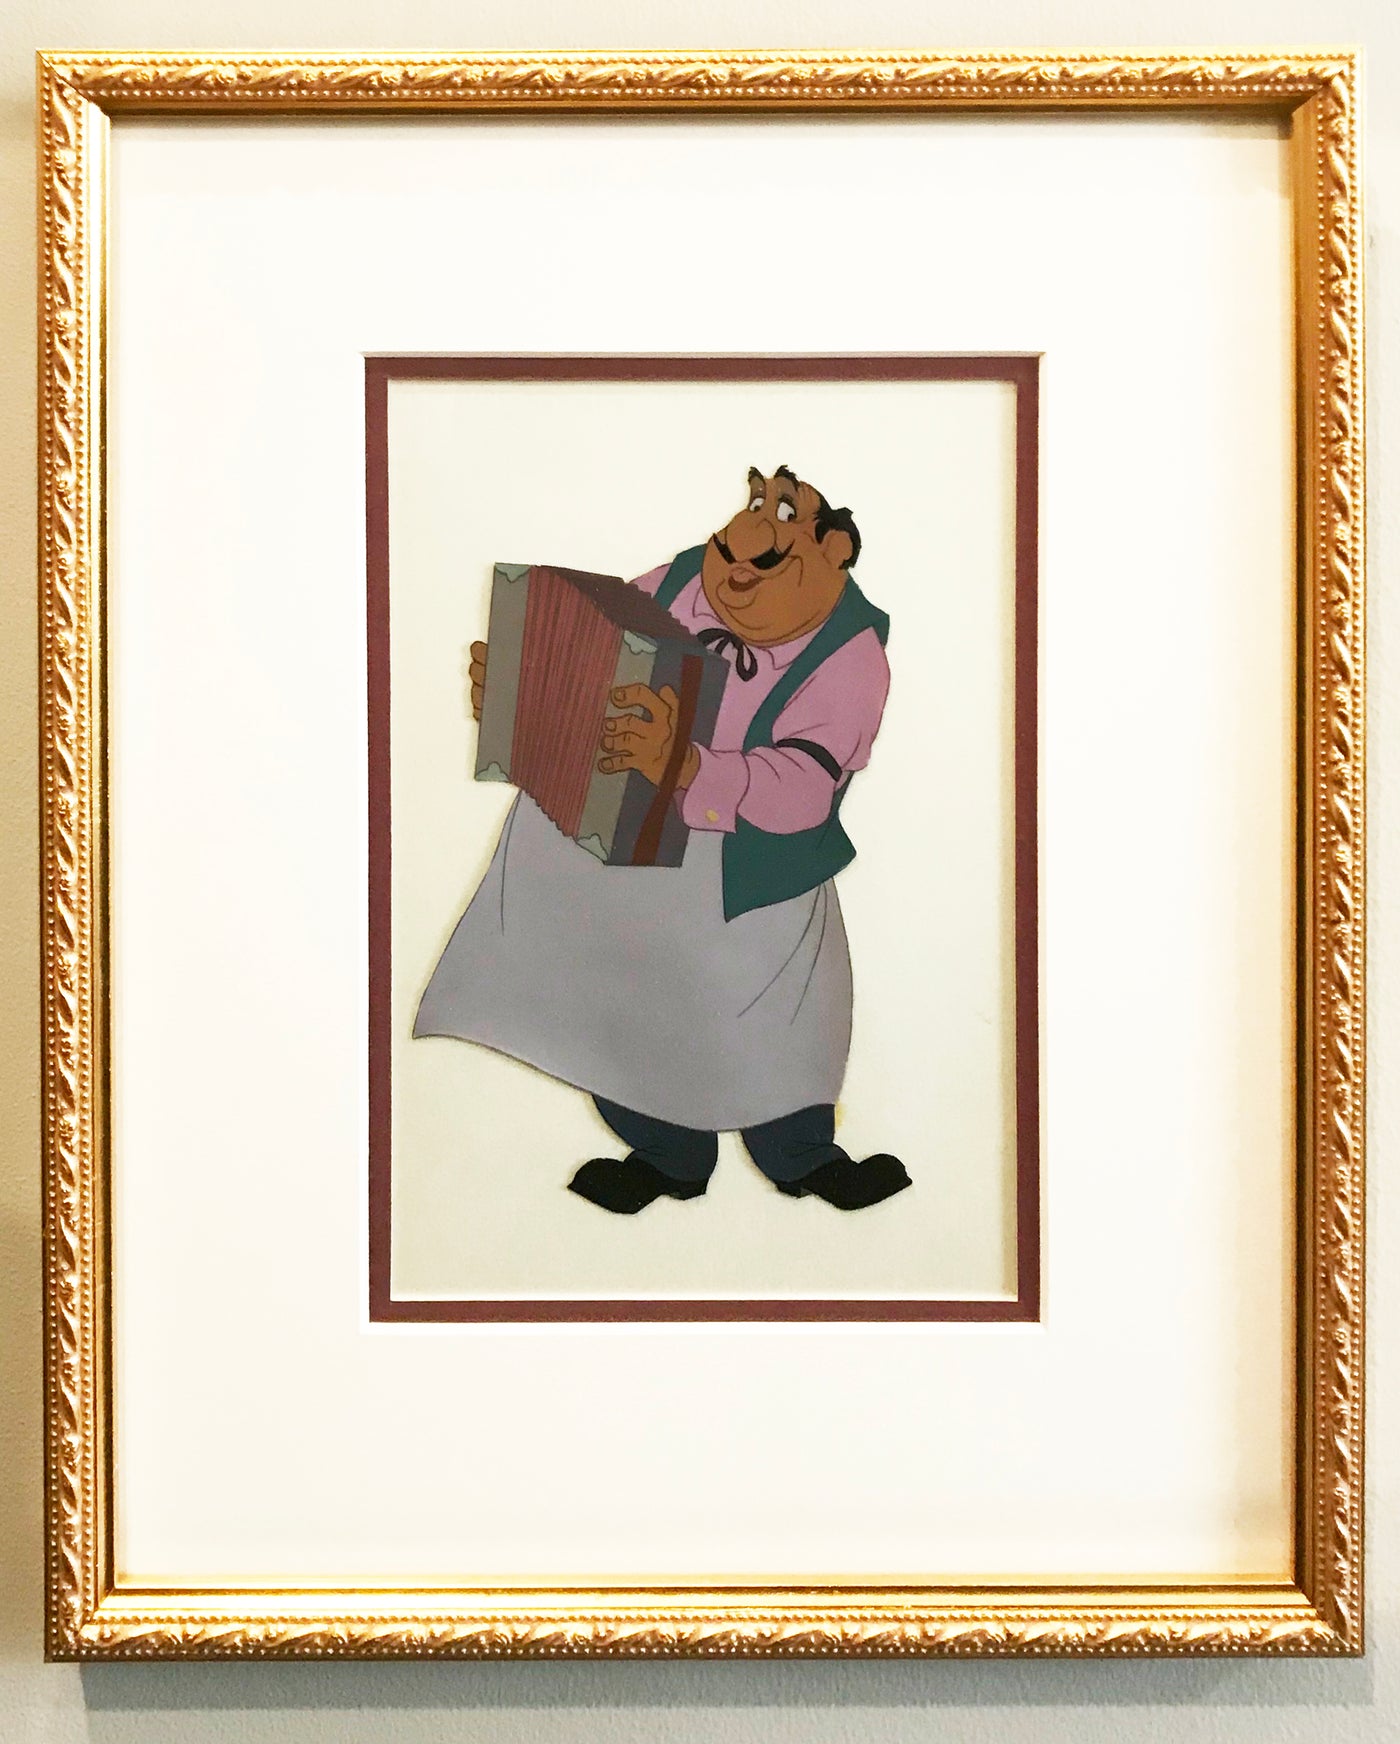 Original Walt Disney Production Cel from Lady and the Tramp featuring Tony